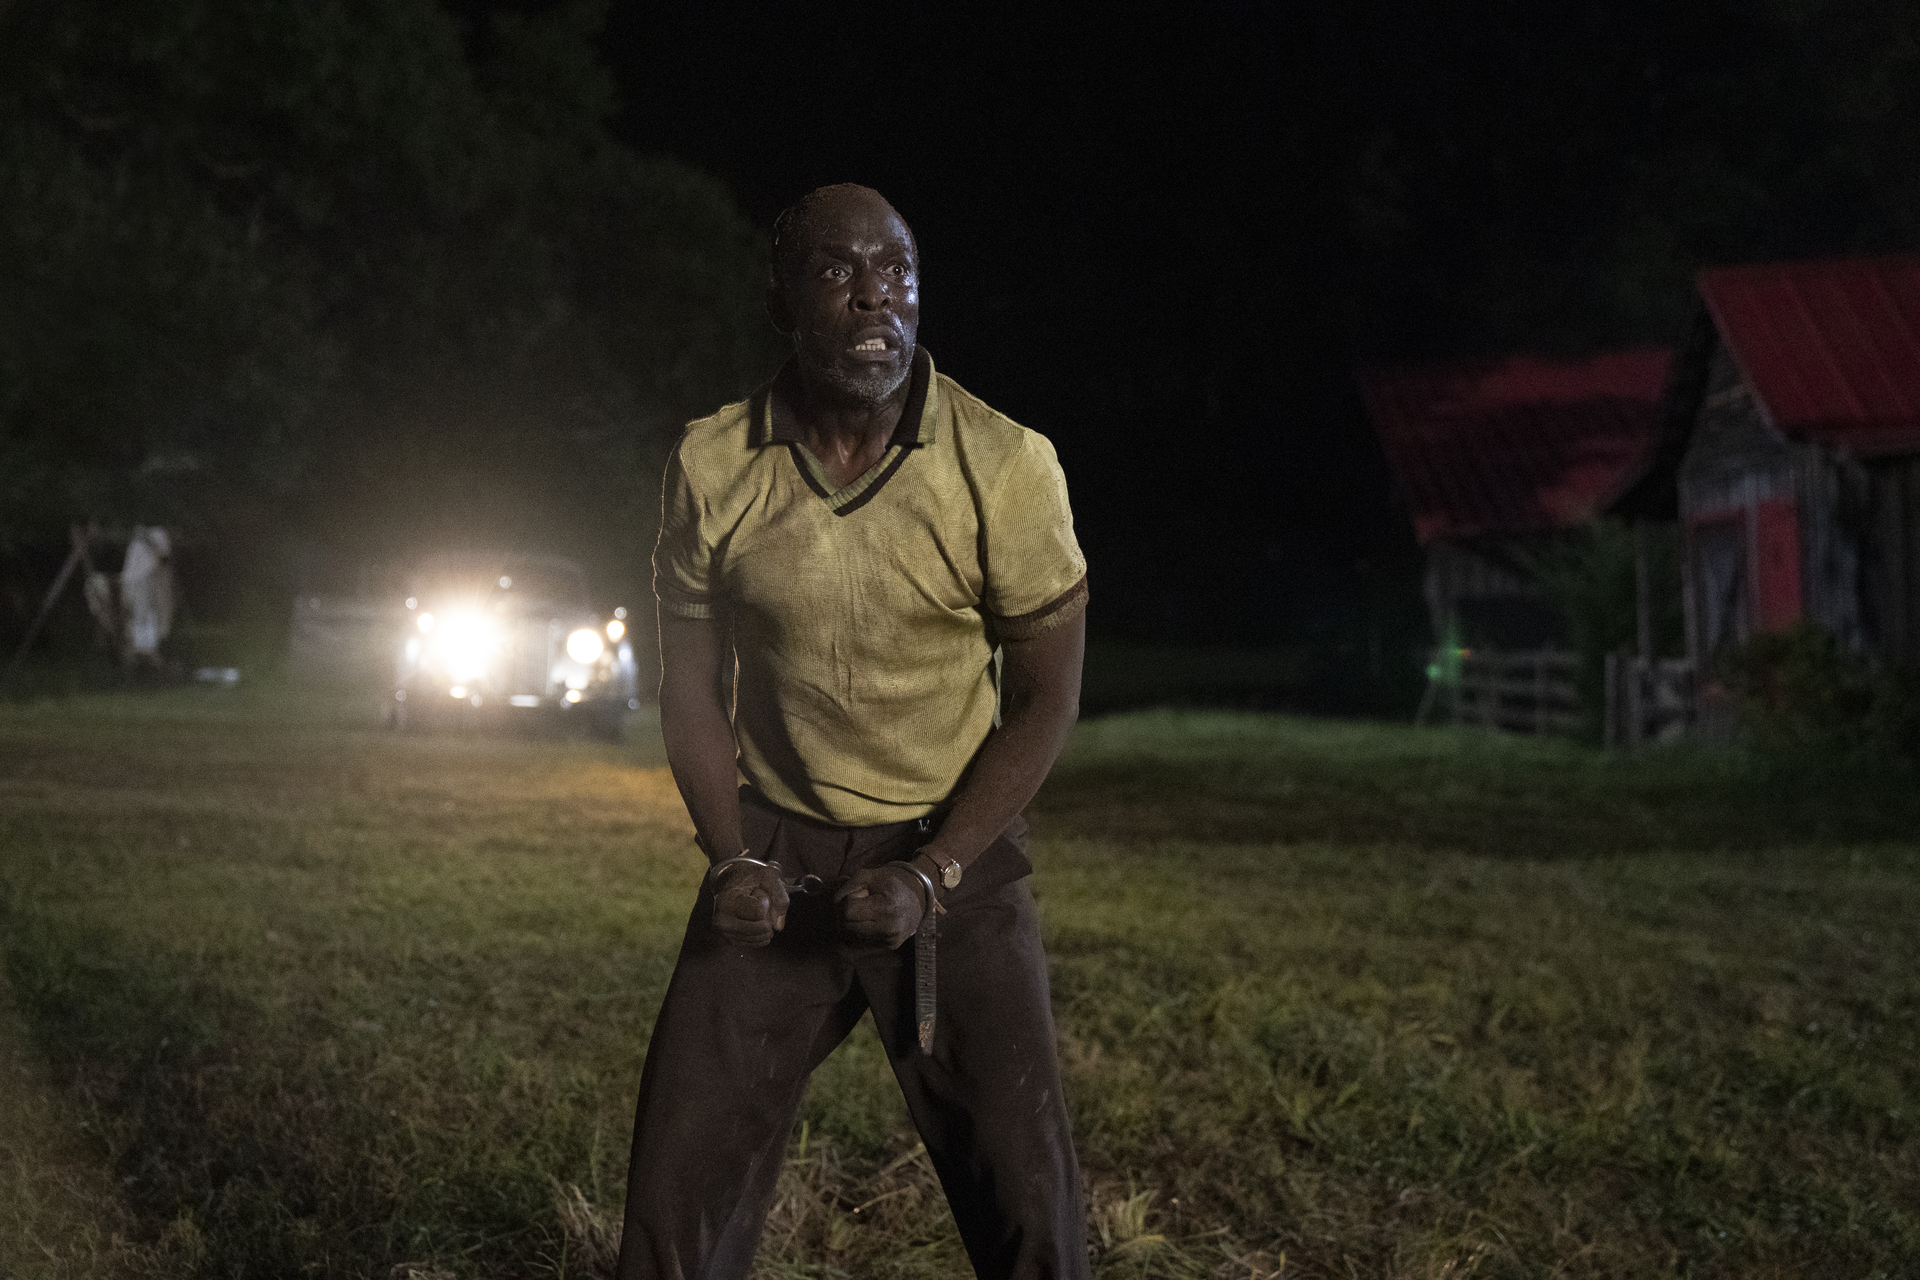 Michael K Williams as Montrose Freeman, wearing handcuffs, in 'Lovecraft Country'